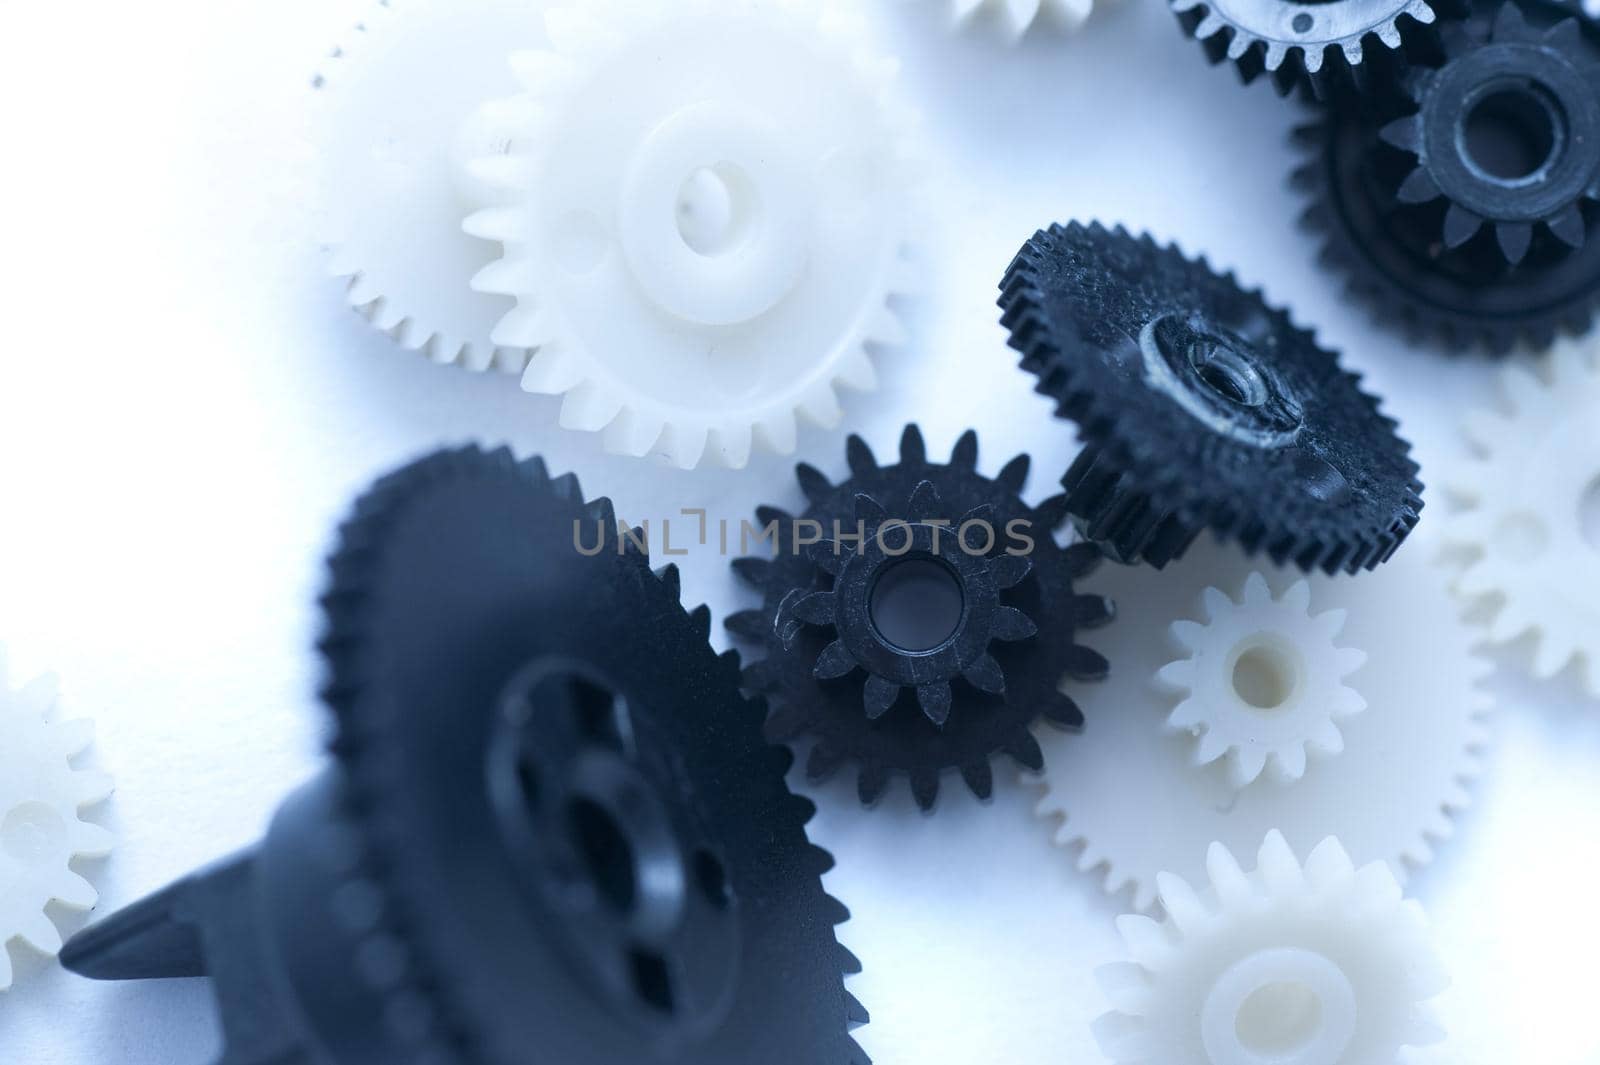 Black and White Gears for Unorganized Concept by sanisra